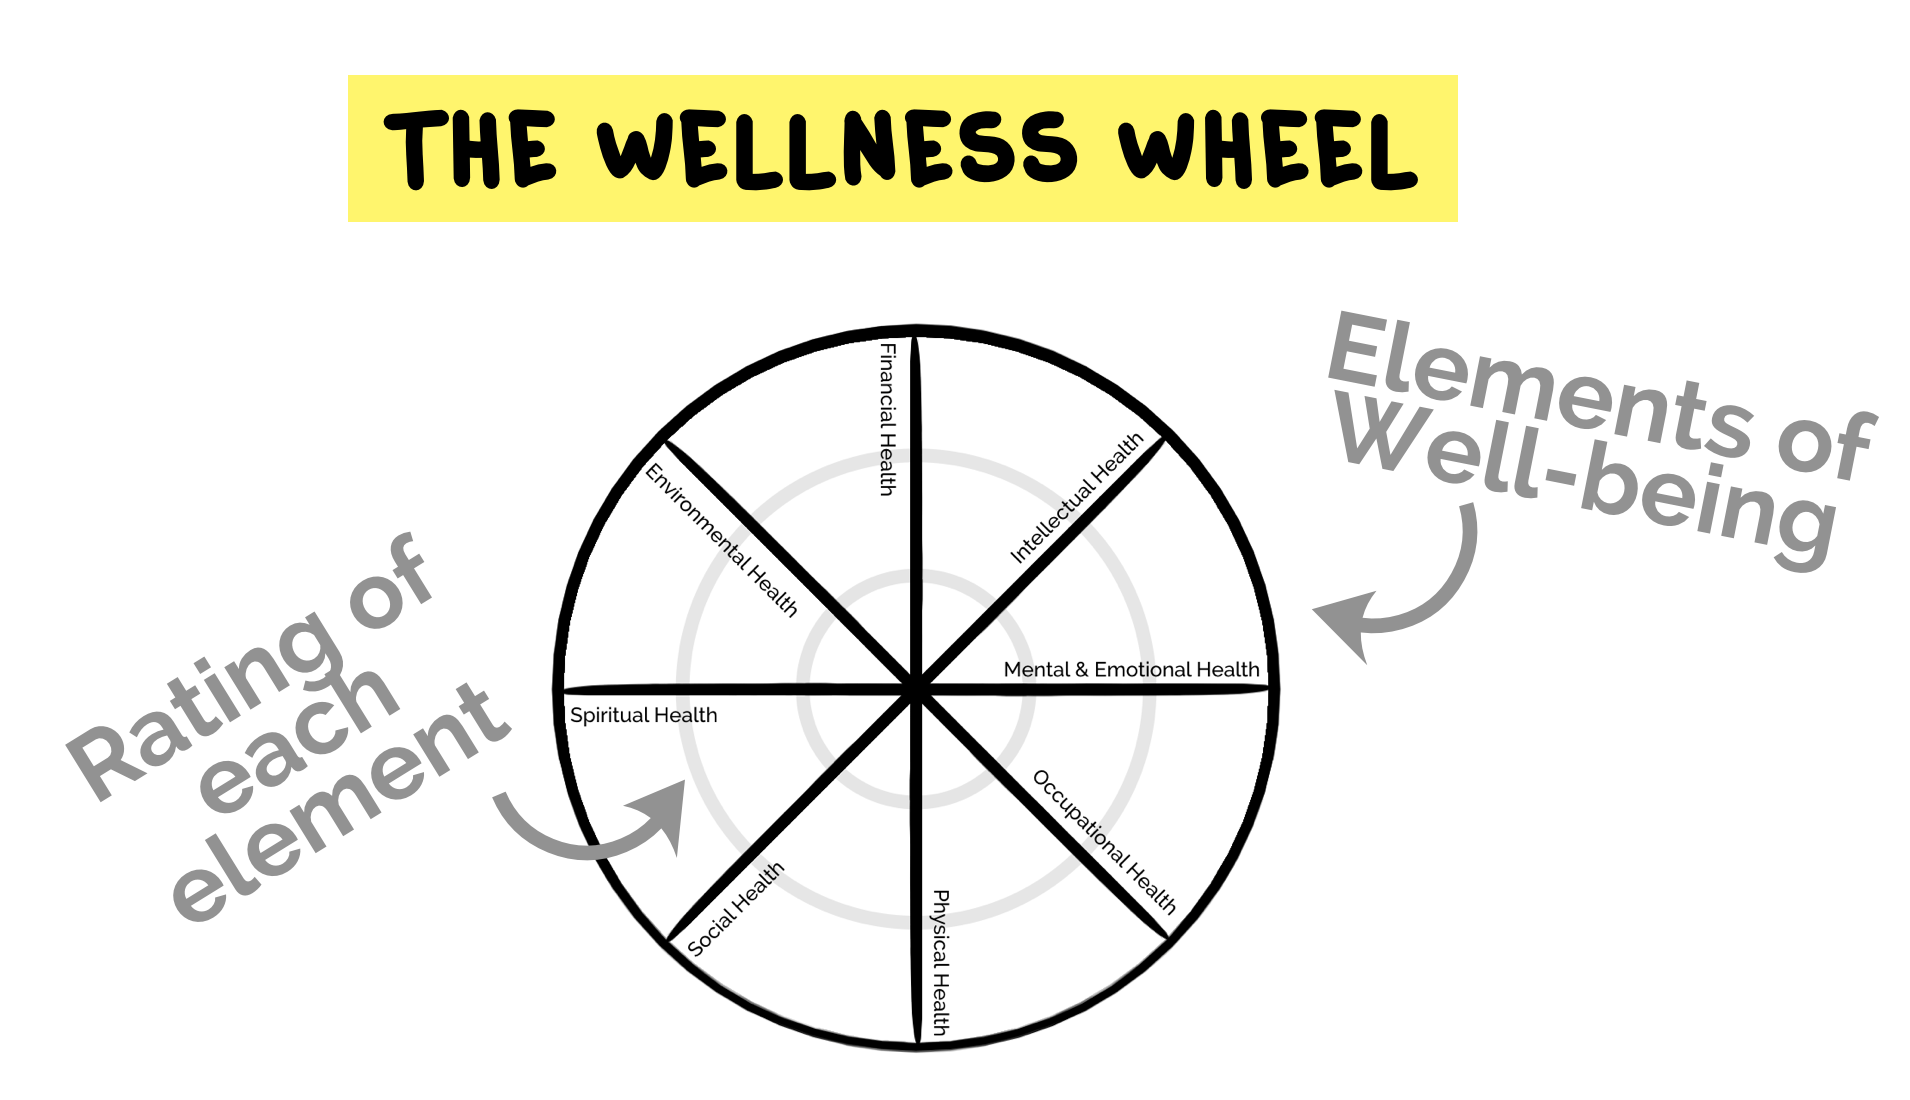 The Wellness Wheel - a free health education lesson plan by Project School Wellness